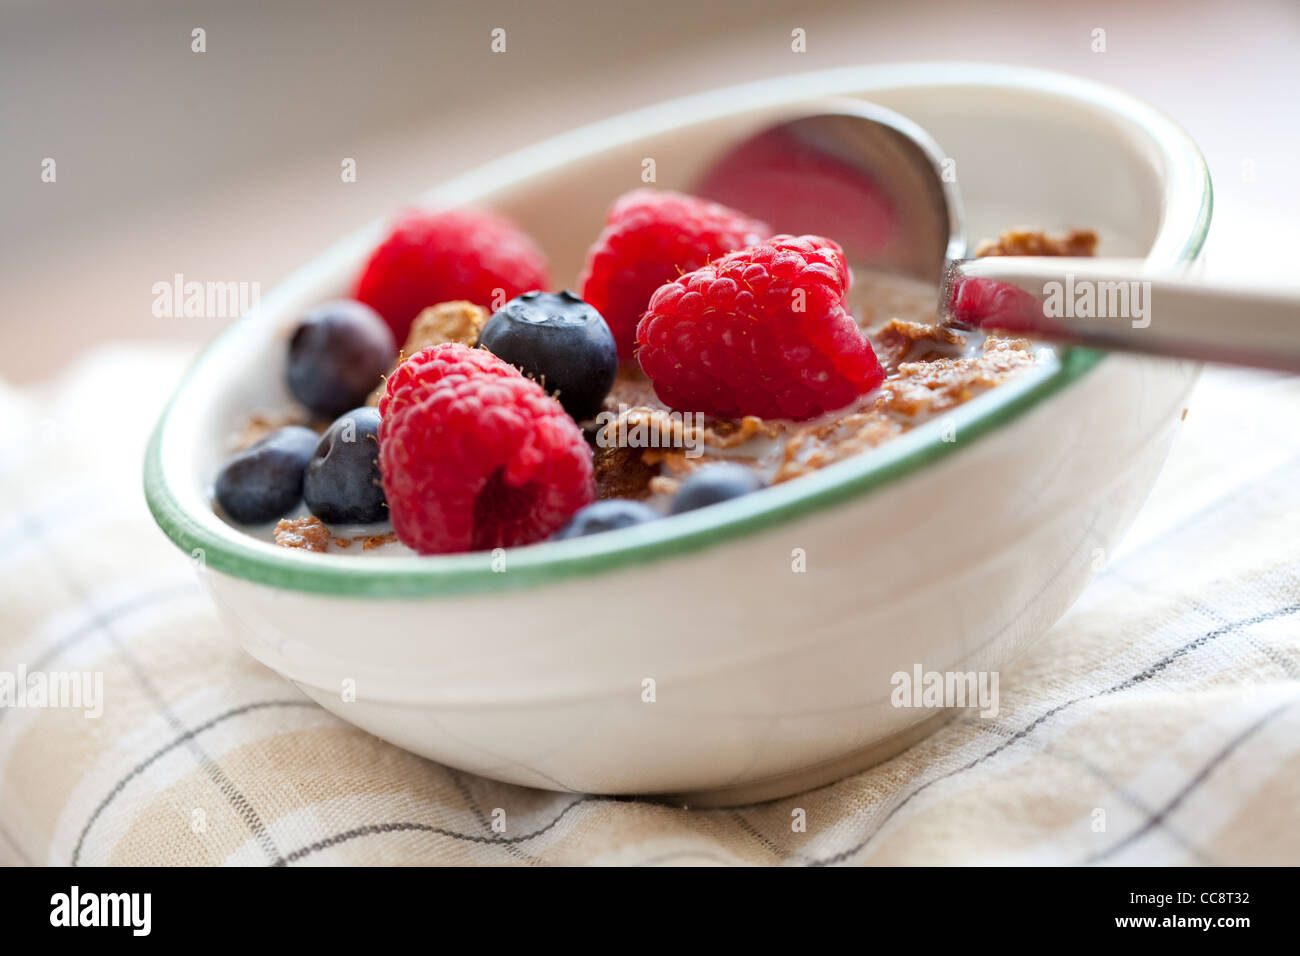 Bowl of cereal with raspberries, blueberries and milk for healthy breakfast. Stock Photo